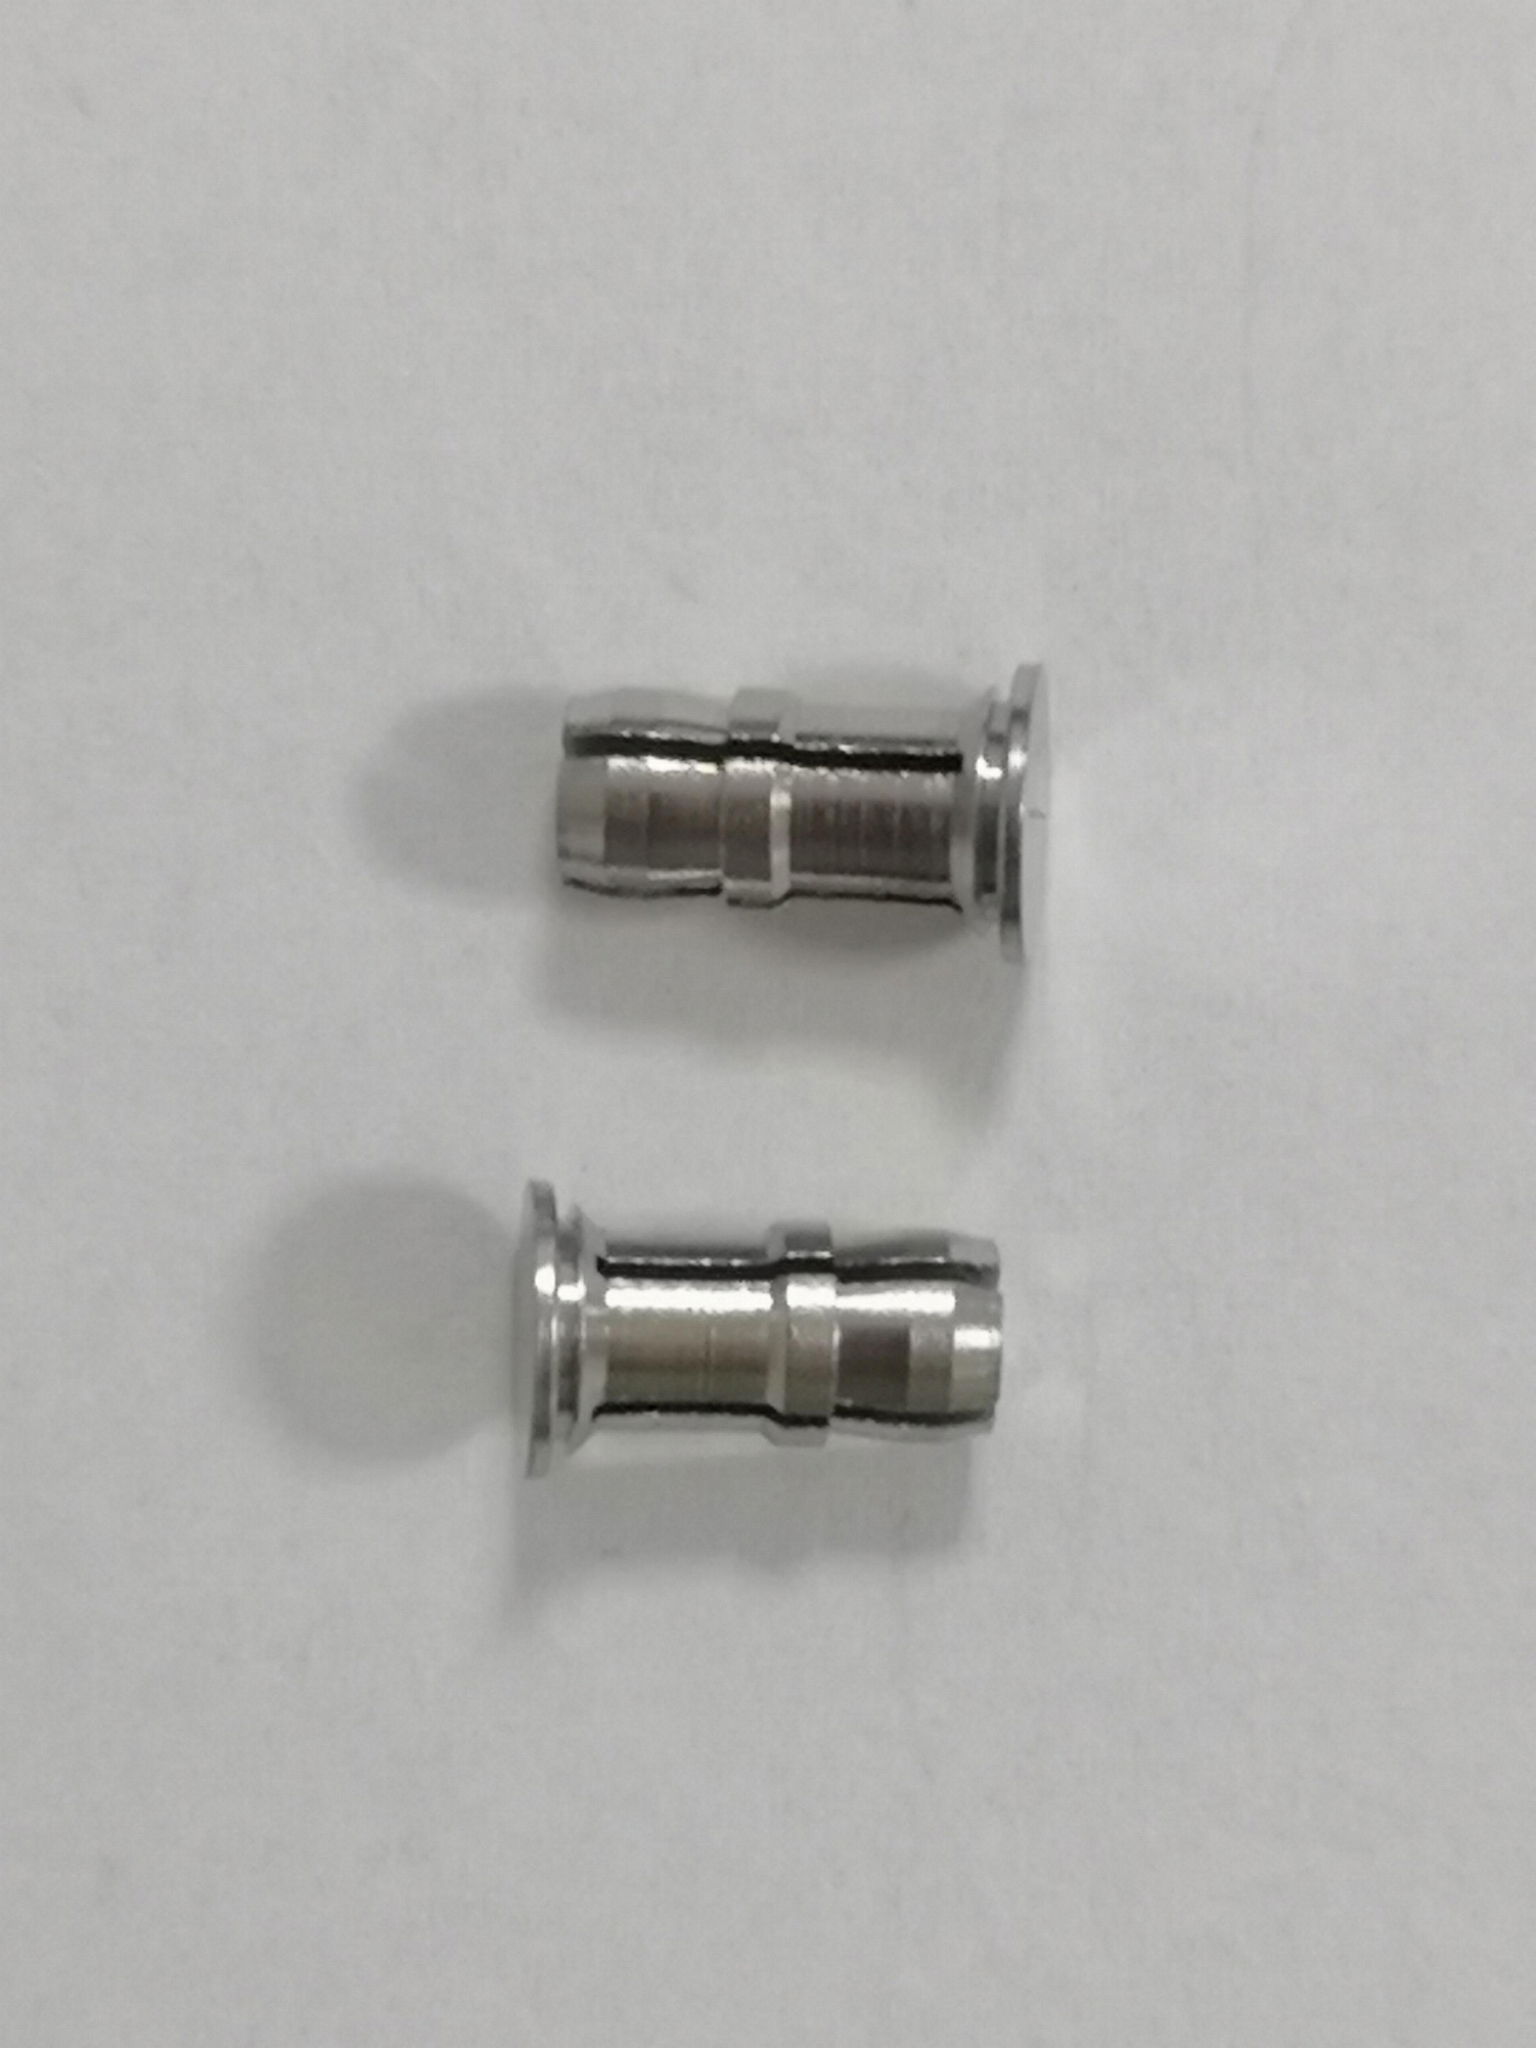 SSS-4MM-8 SPRING-TOP STANDOFFS Self-Clinching Spacers 4